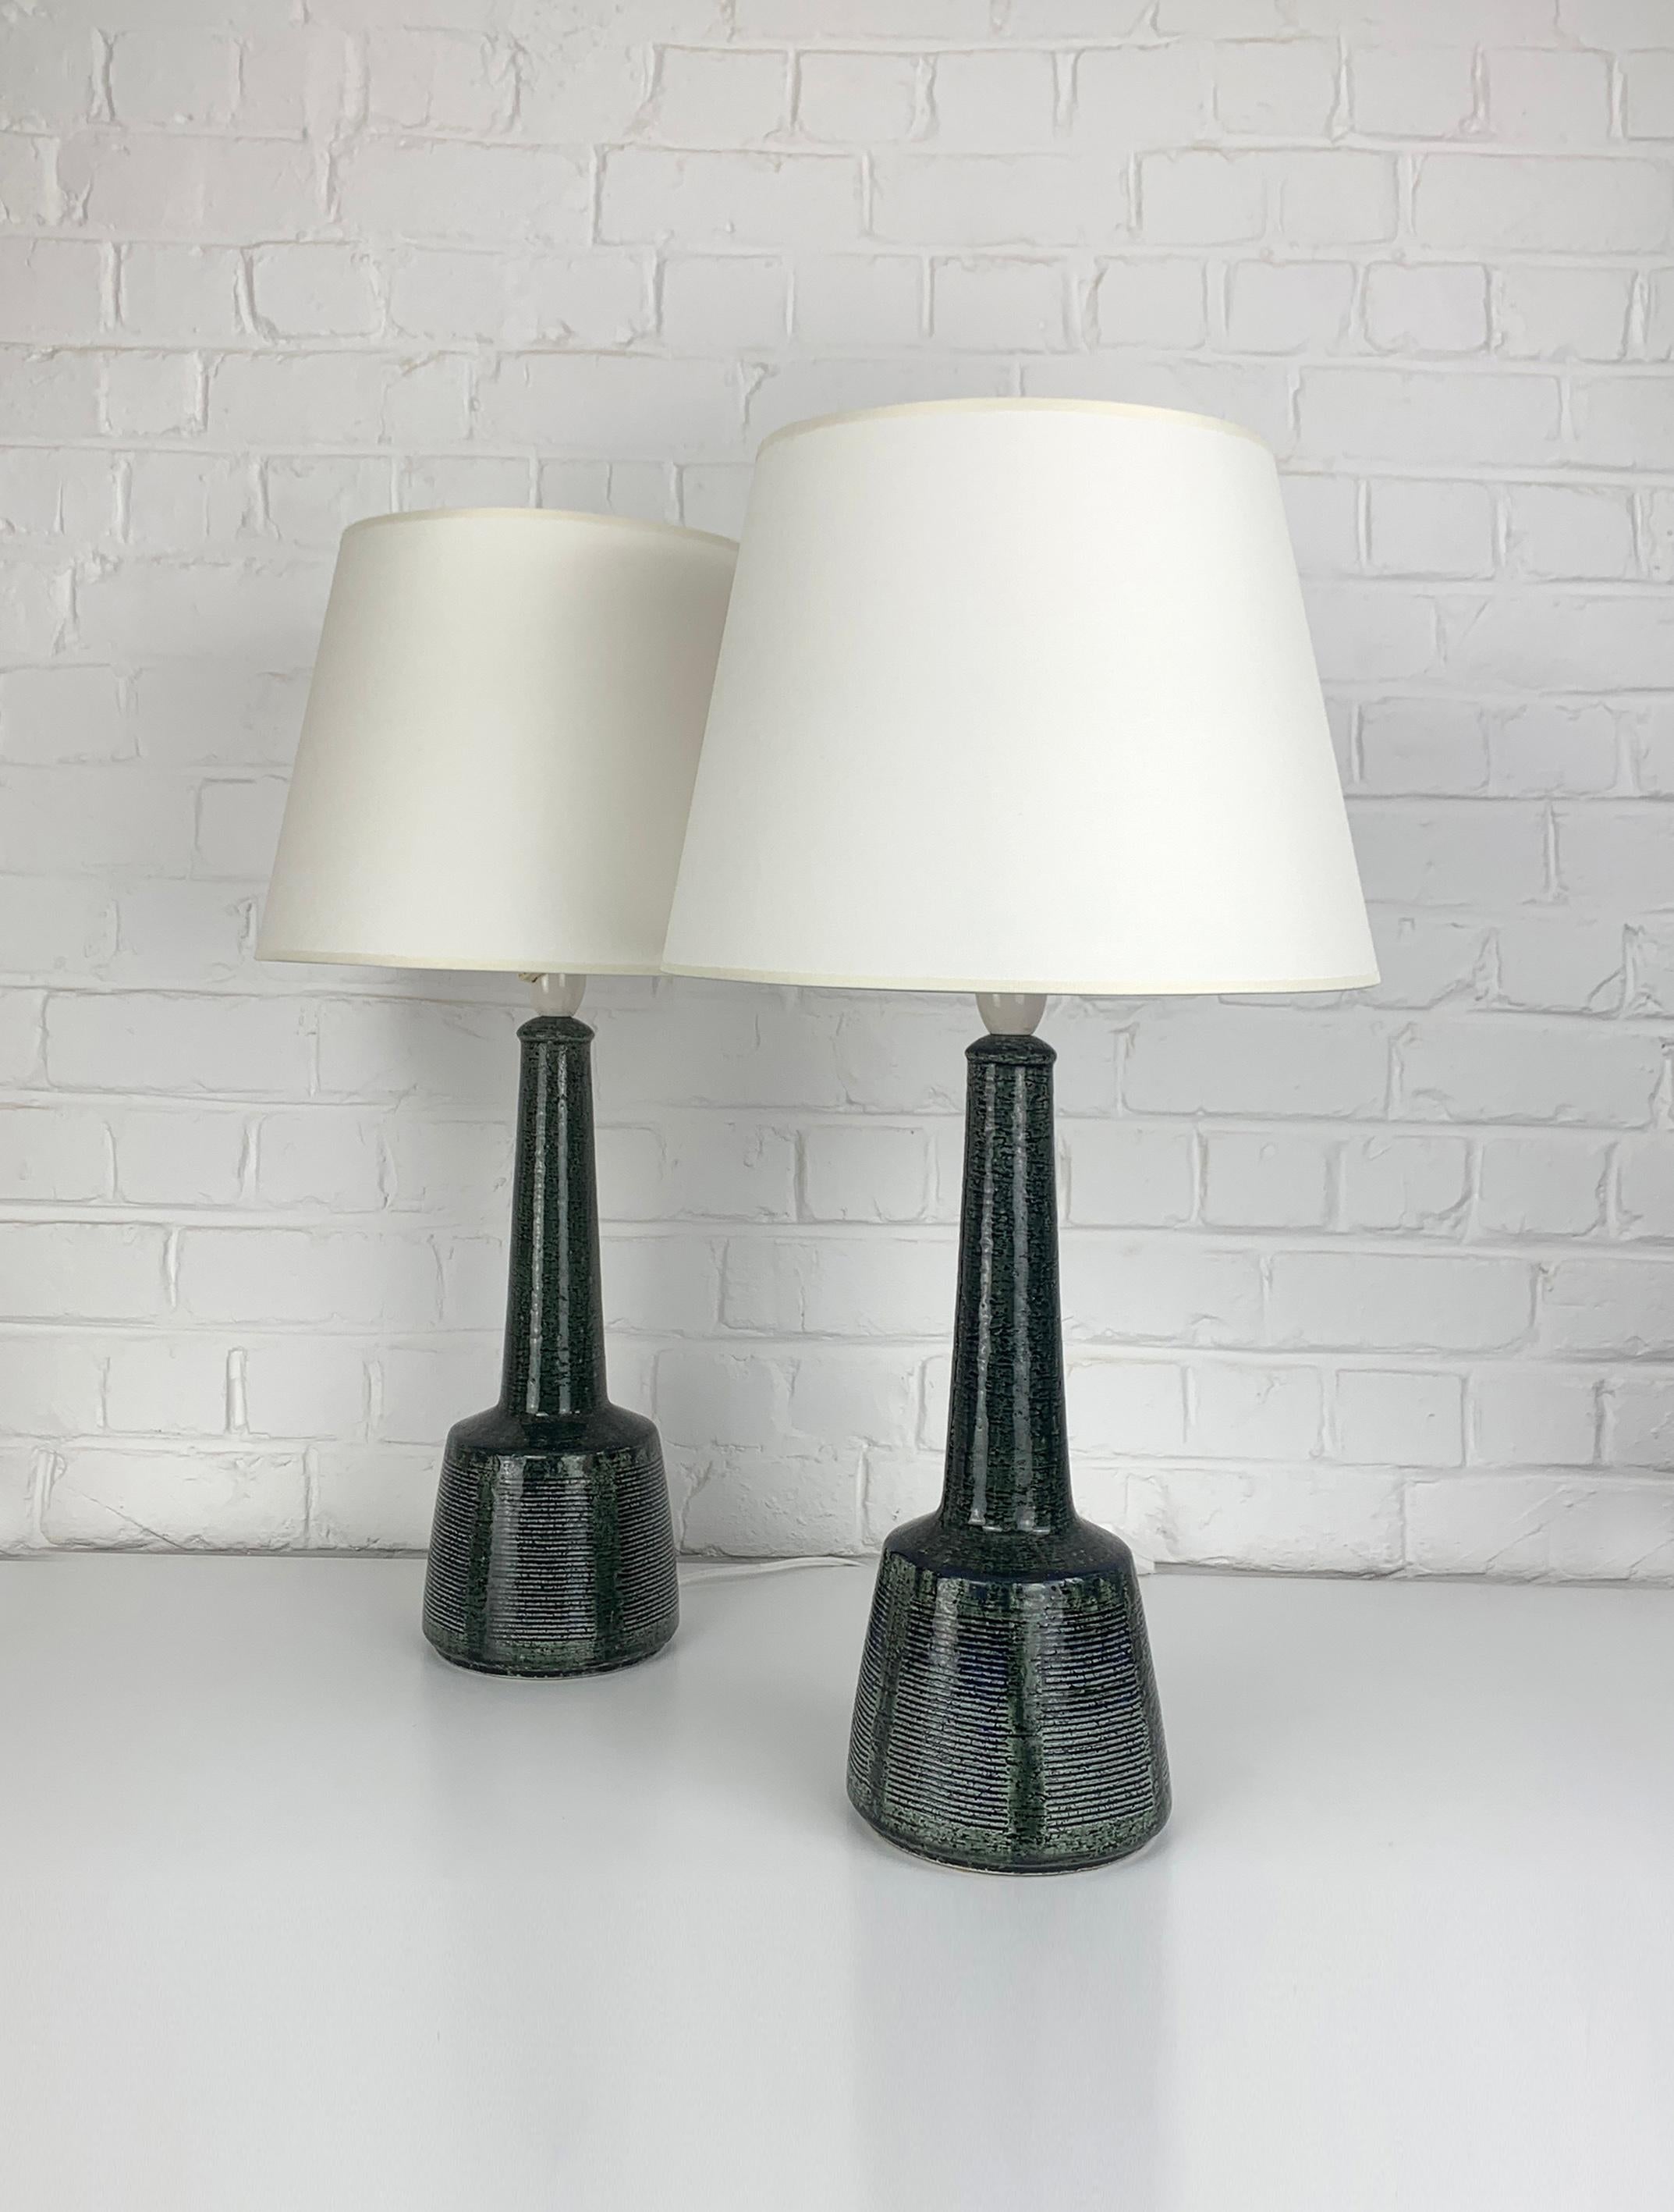 Pair of Tall Ceramic table lamps by Palshus, design by Esben Klint for Le Klint 7